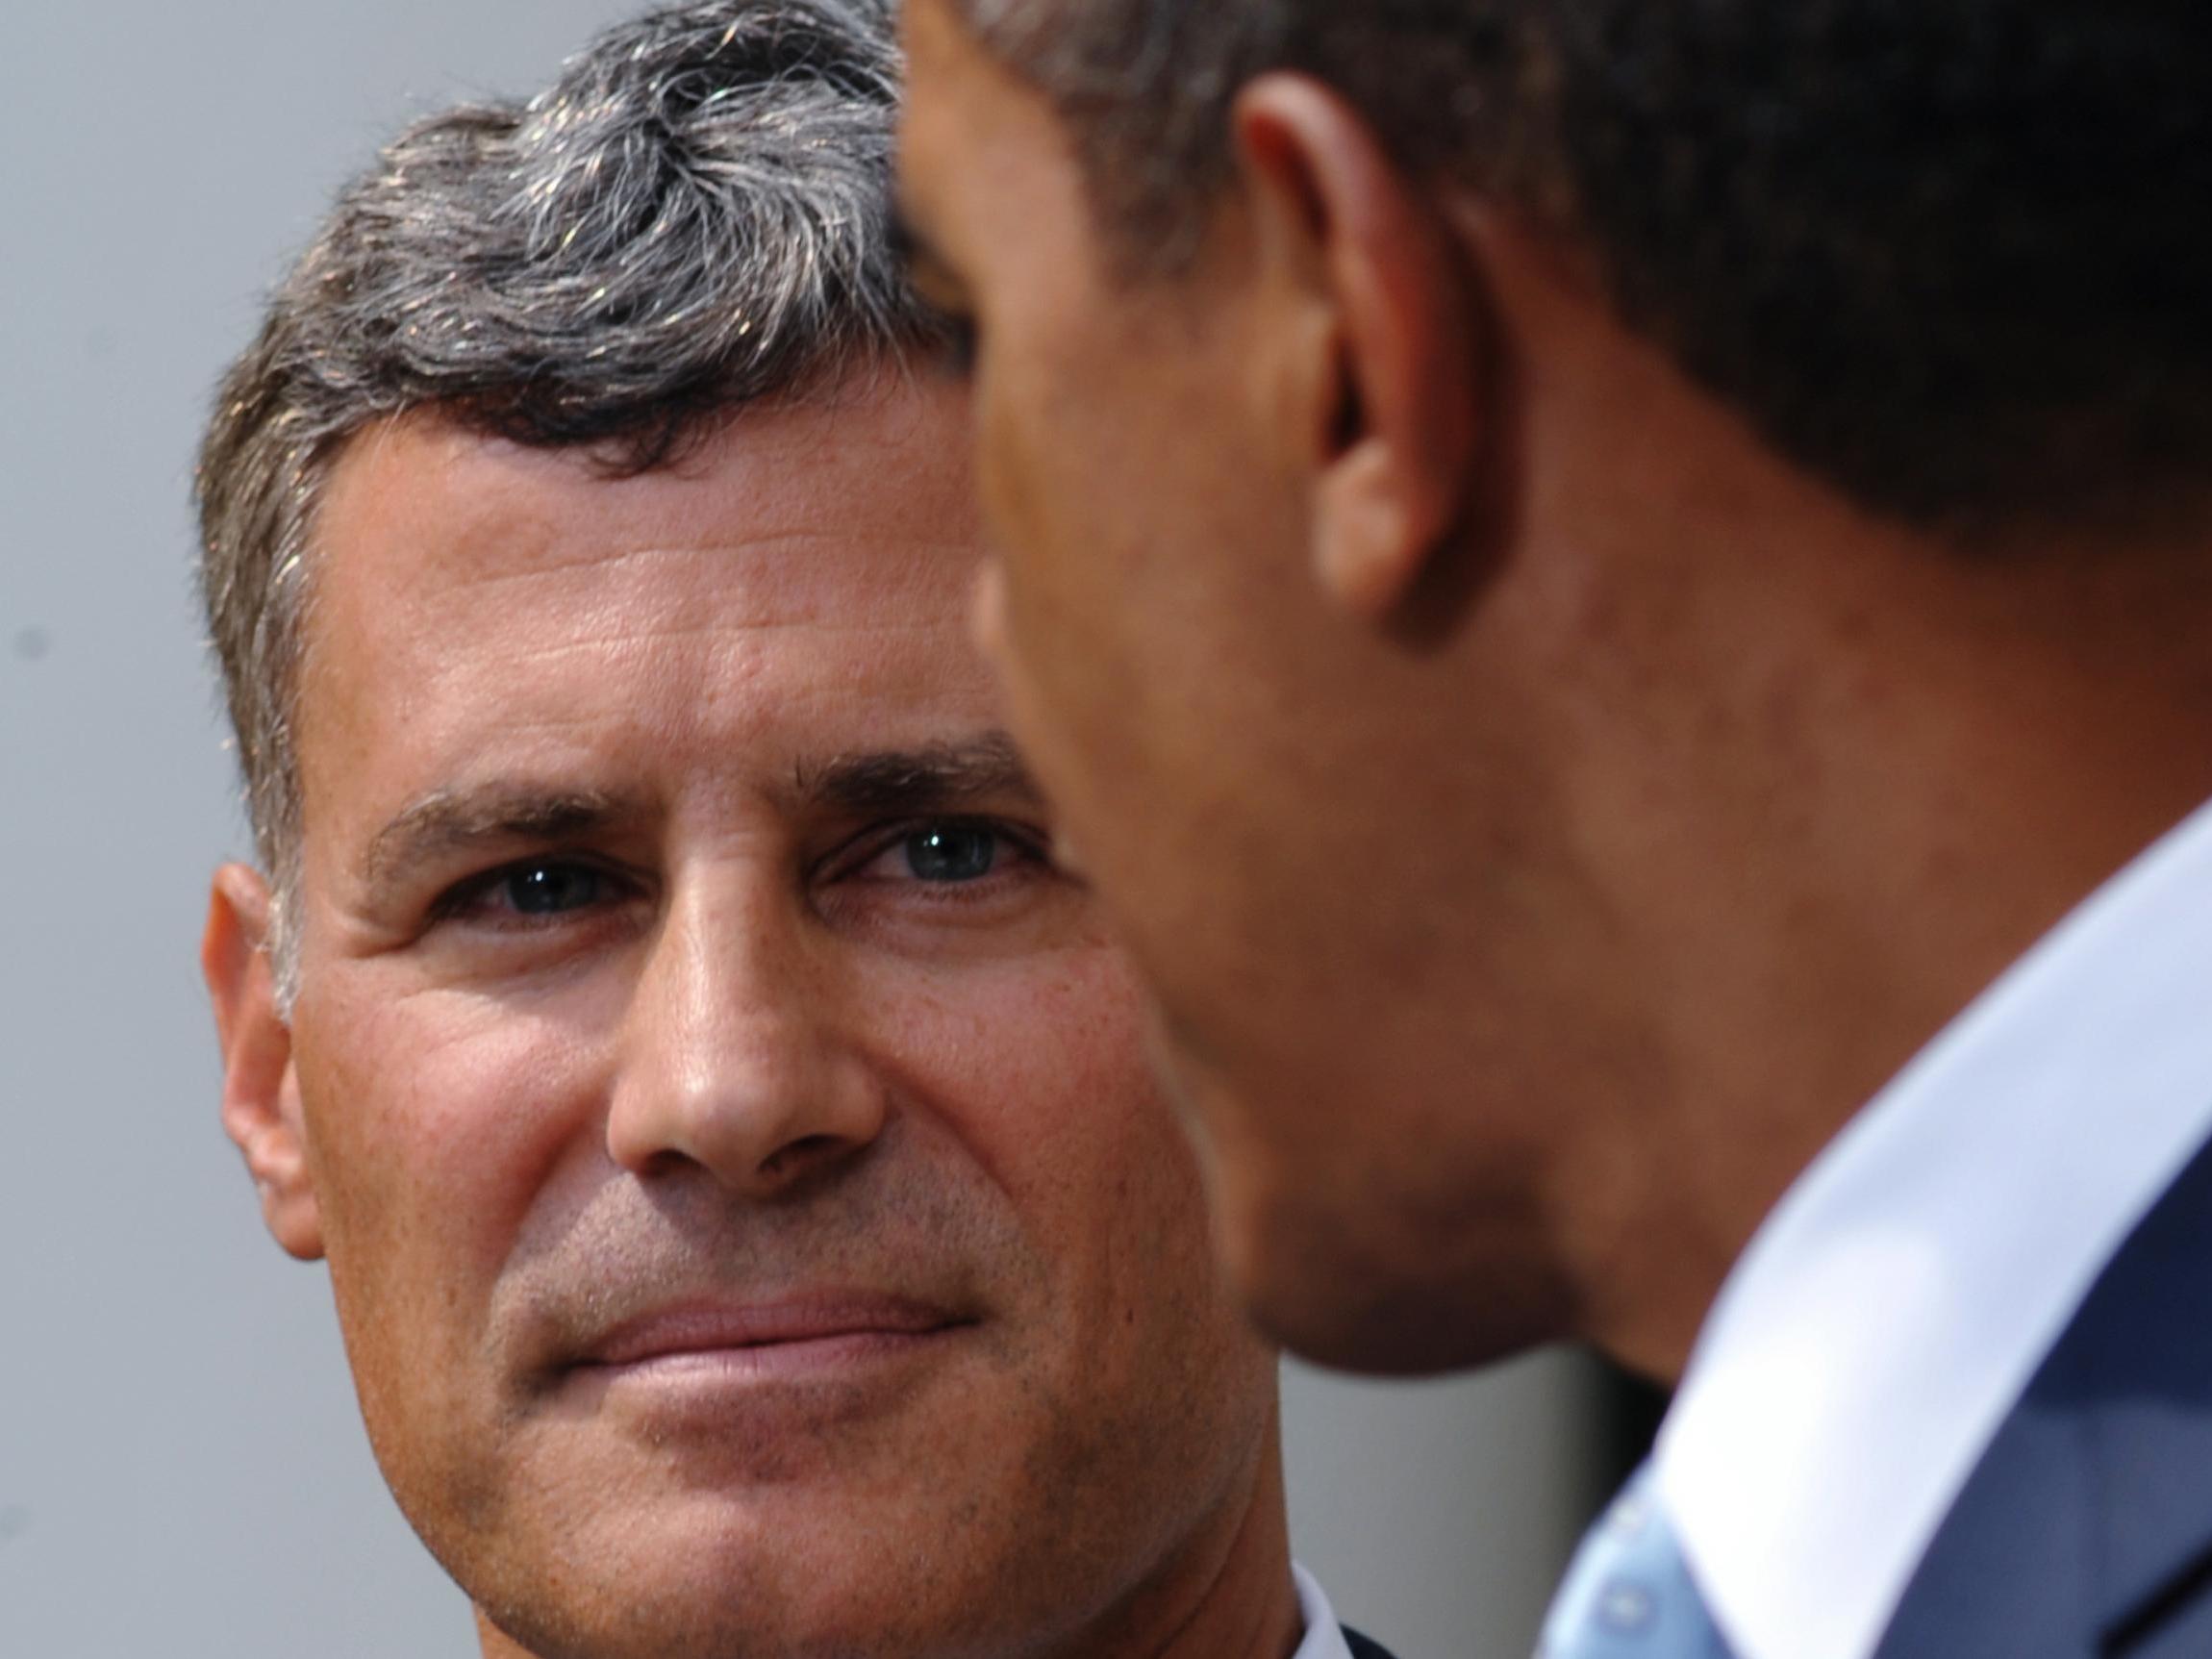 Krueger with Obama as he is appointed to the Council of Economic Advisers in 2011